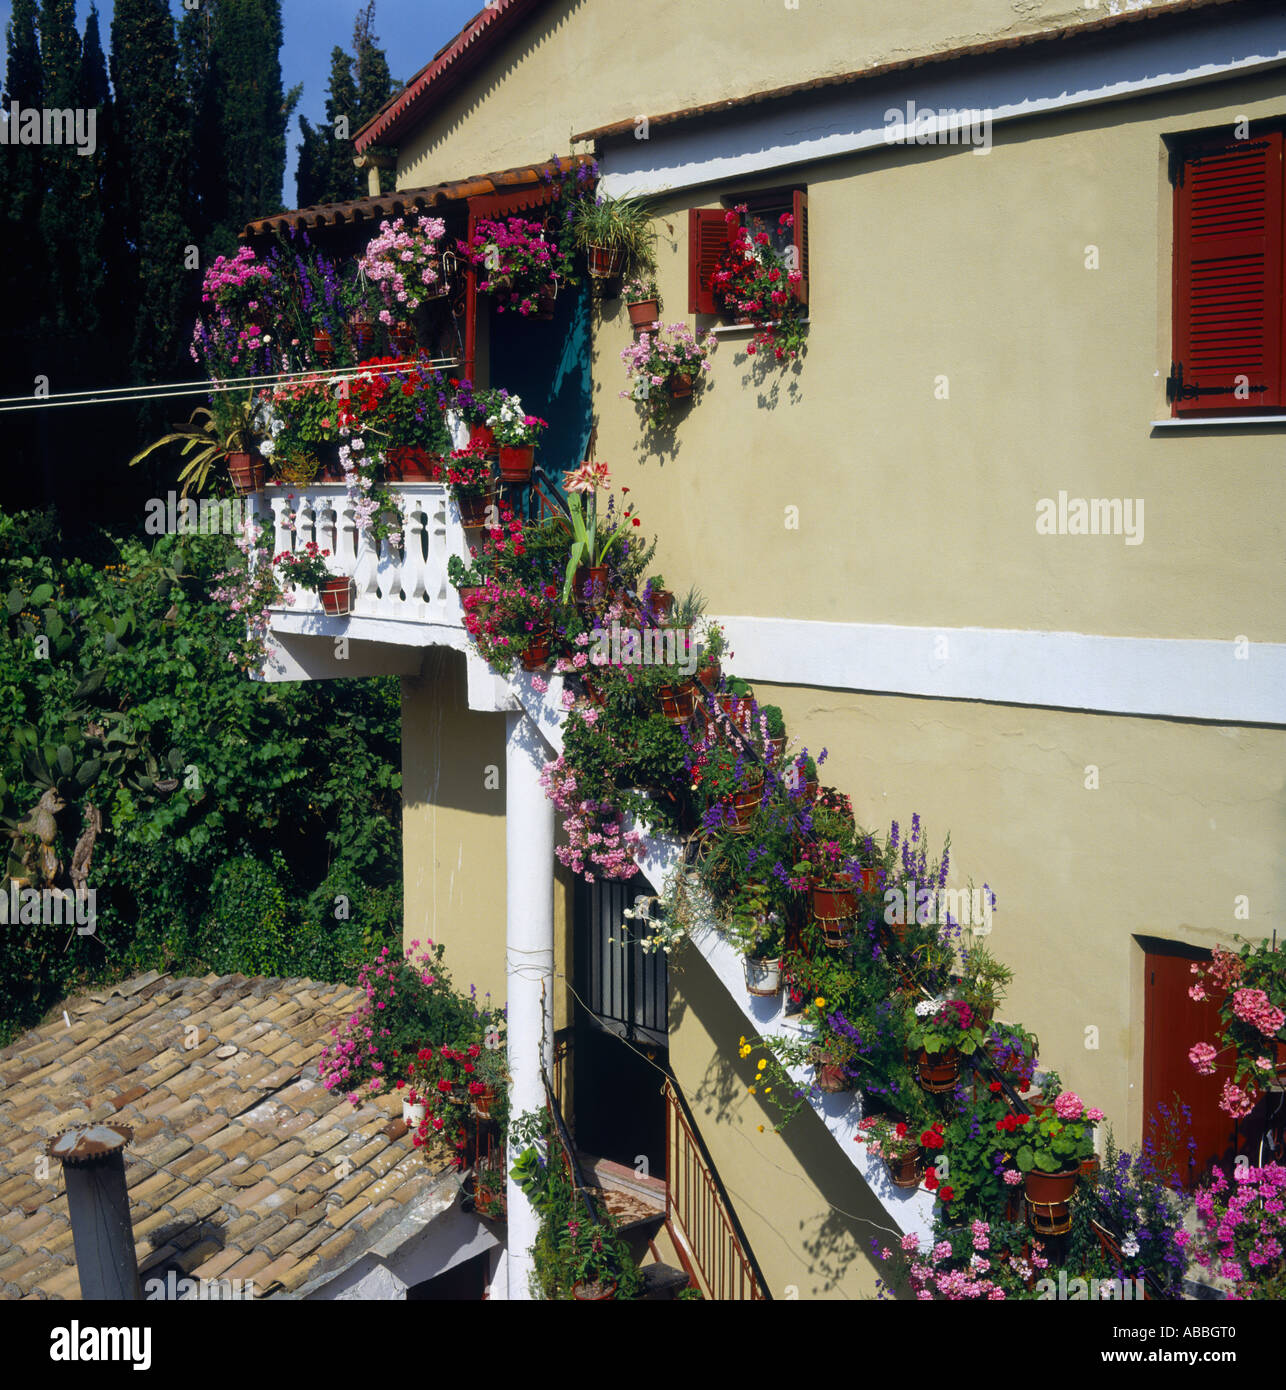 Flower pots in sunshine on steep house steps with terracotta tiles and brown shutters Sinaradhes Corfu The Greek Islands Greece Stock Photo